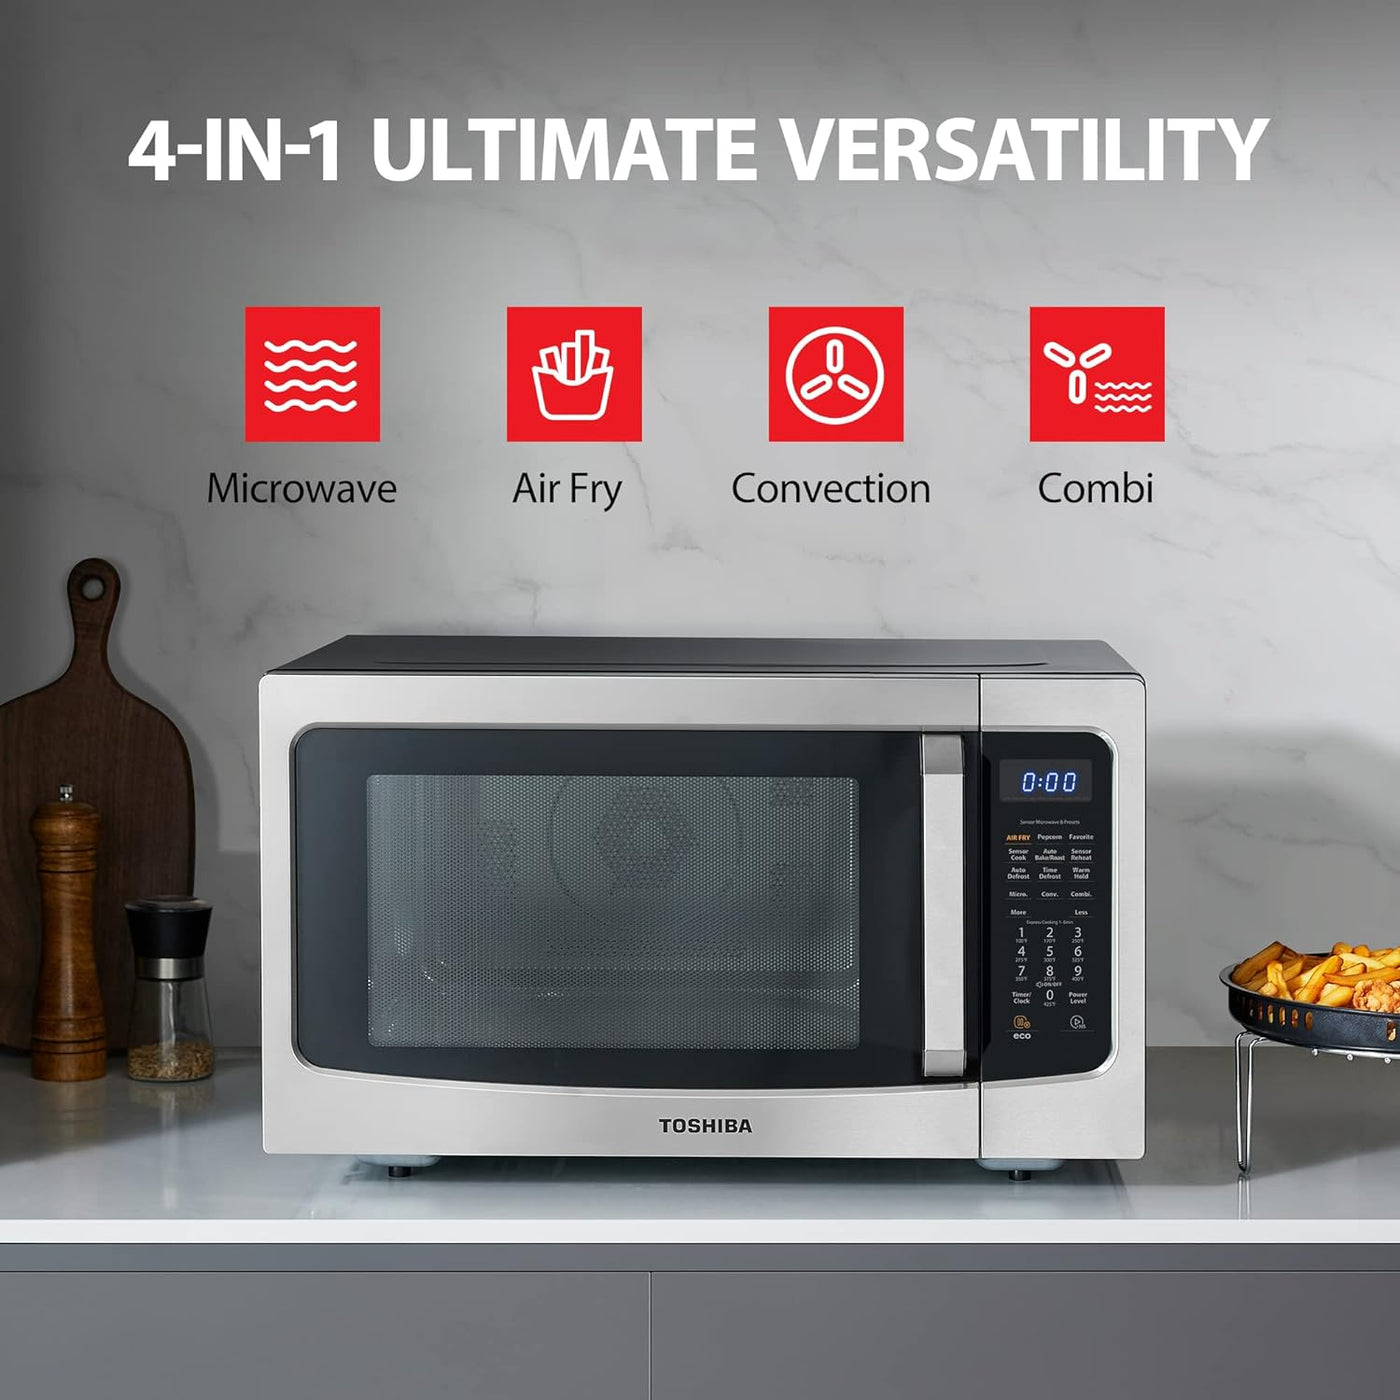 TOSHIBA 4-in-1 ML-EC42P(SS) Countertop Microwave Oven, 1.5 Cu Ft, 1000W, Silver - $130